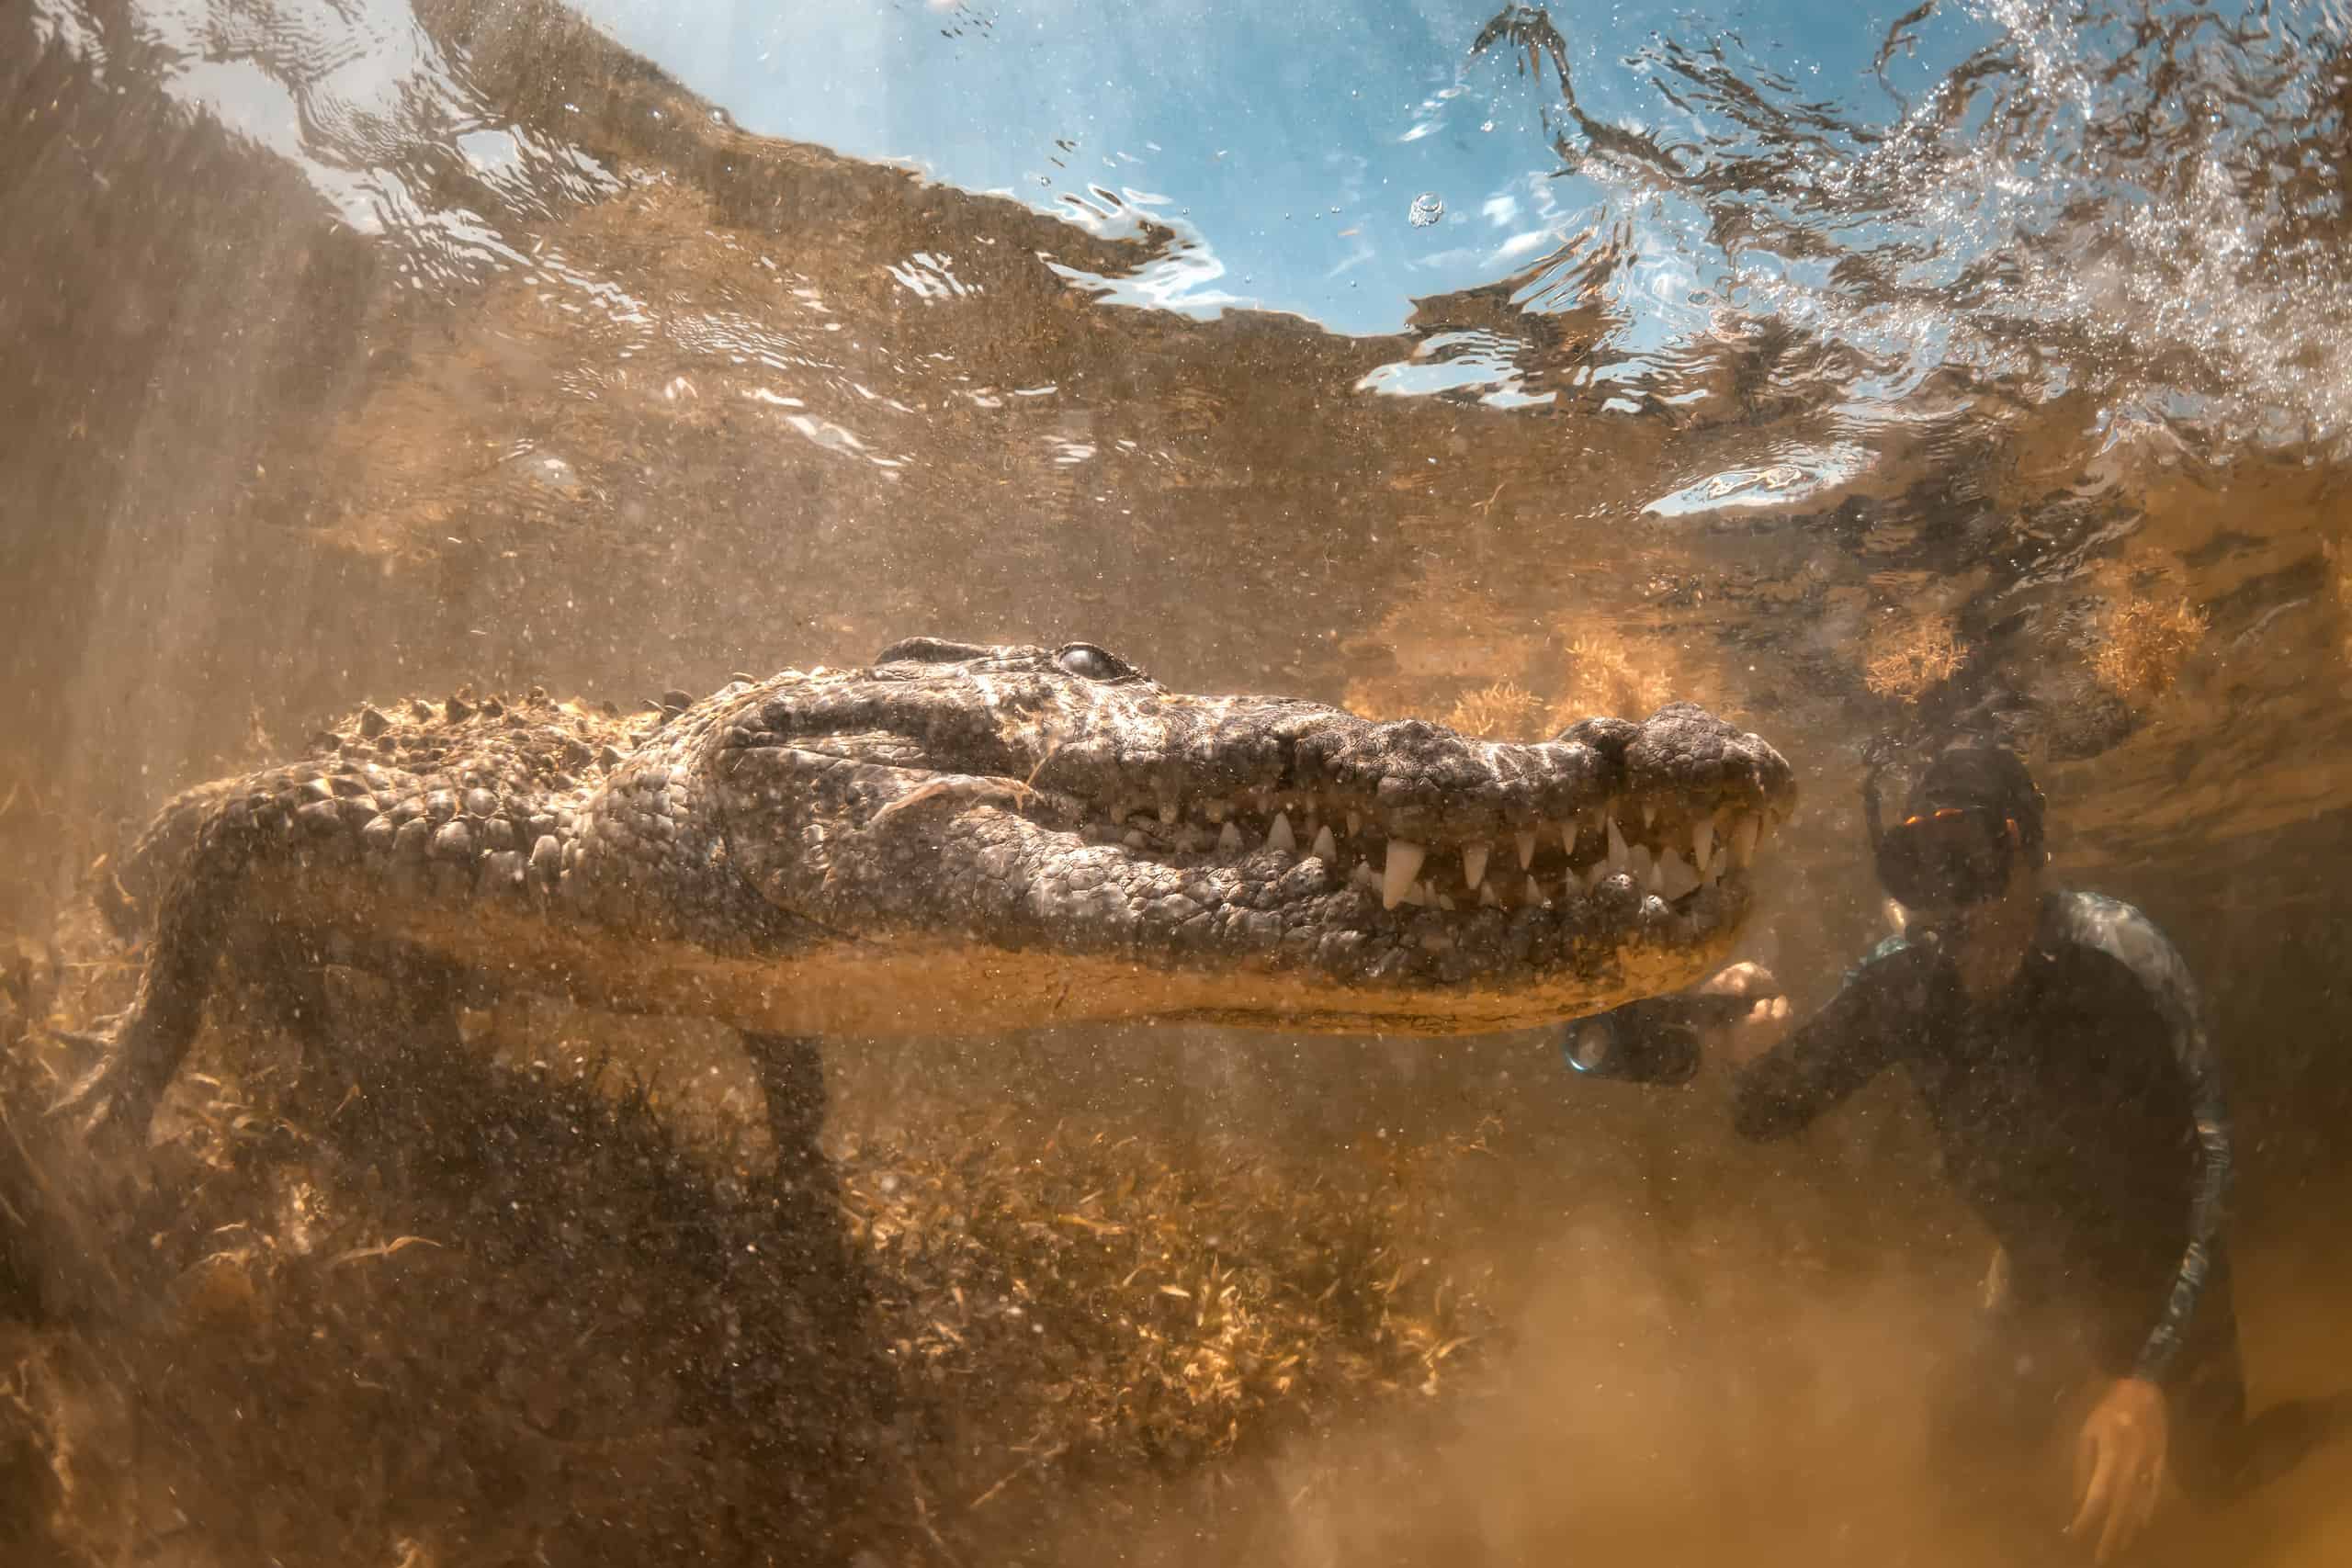 Crocodile underwater opens mouth